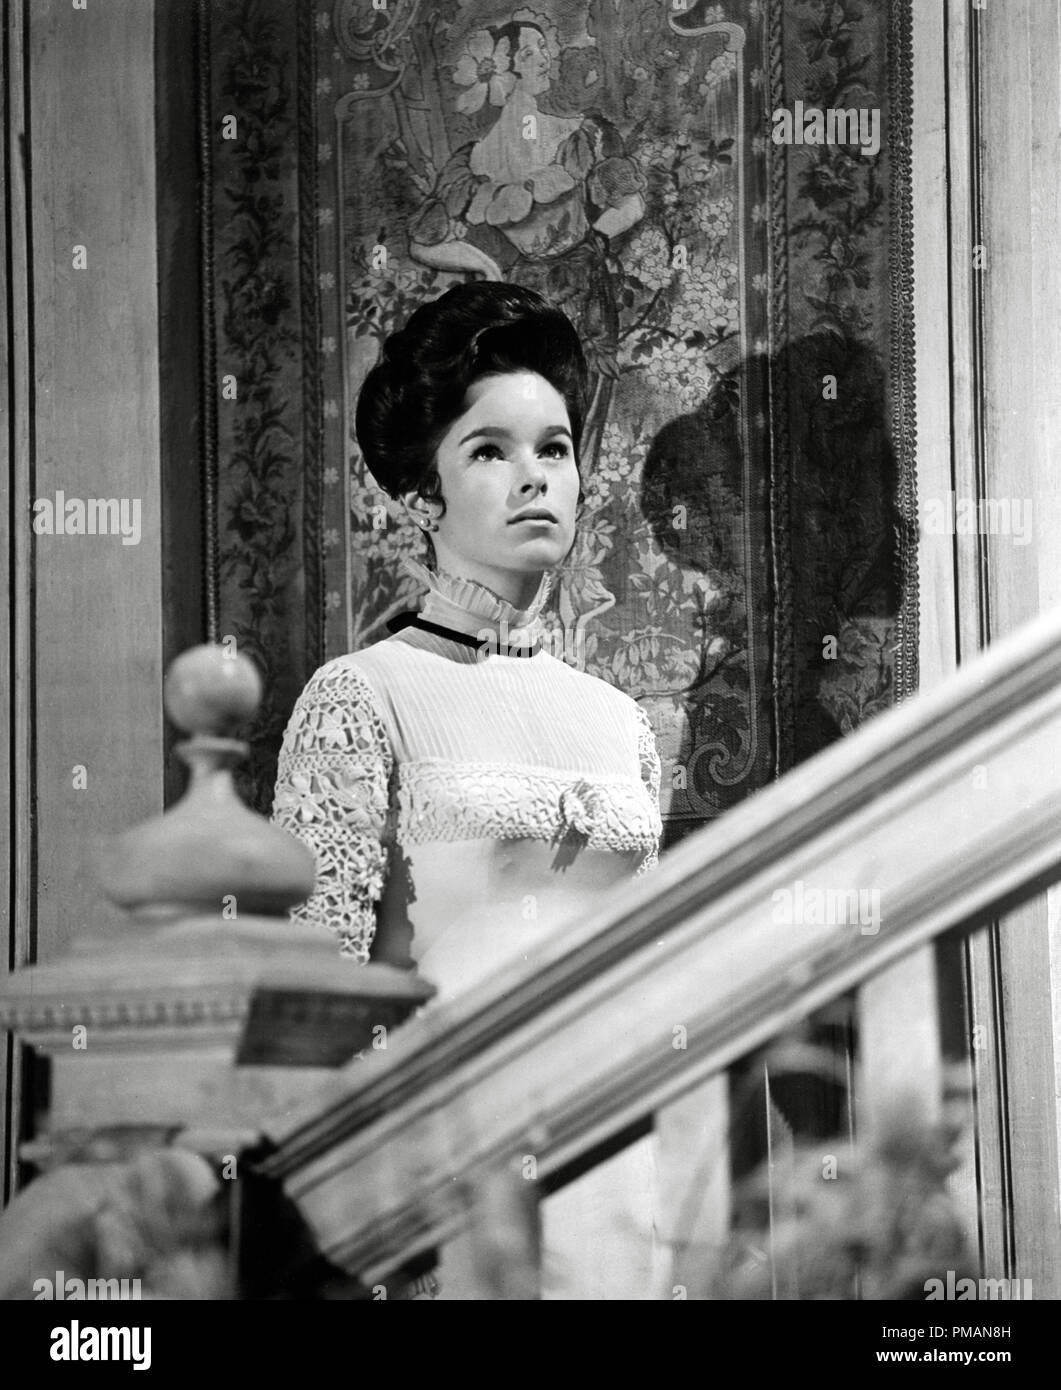 Film Still/Publicity Still of 'Doctor Zhivago' Geraldine Chaplin 1965 MGM Cinema Publishers Collection - No Release - For Editorial Use Only. File Reference # 33505 417THA Stock Photo